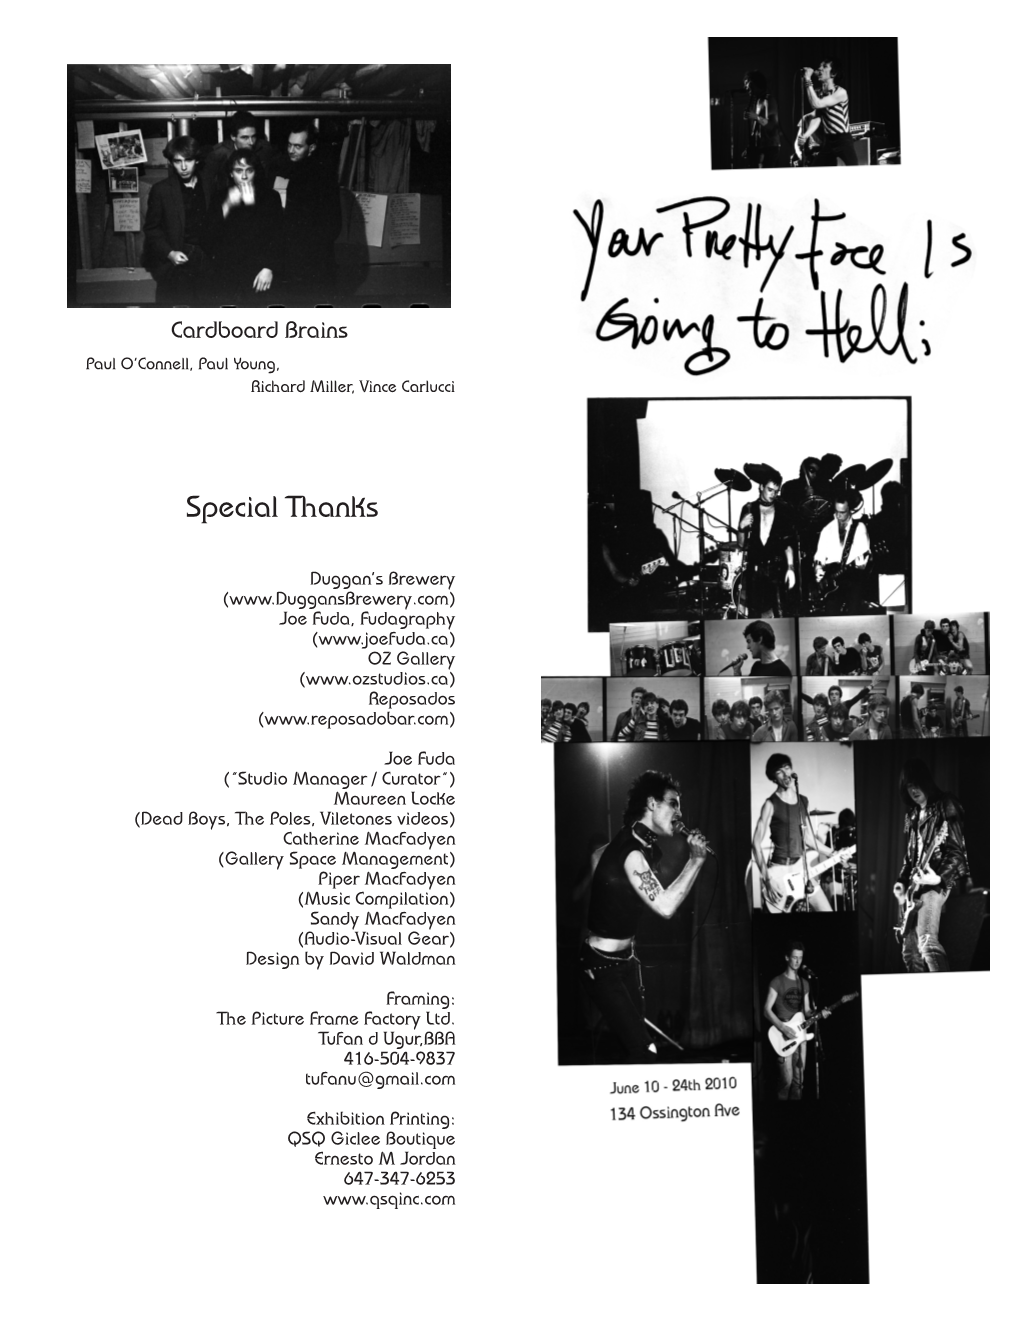 A Download of the Show Program